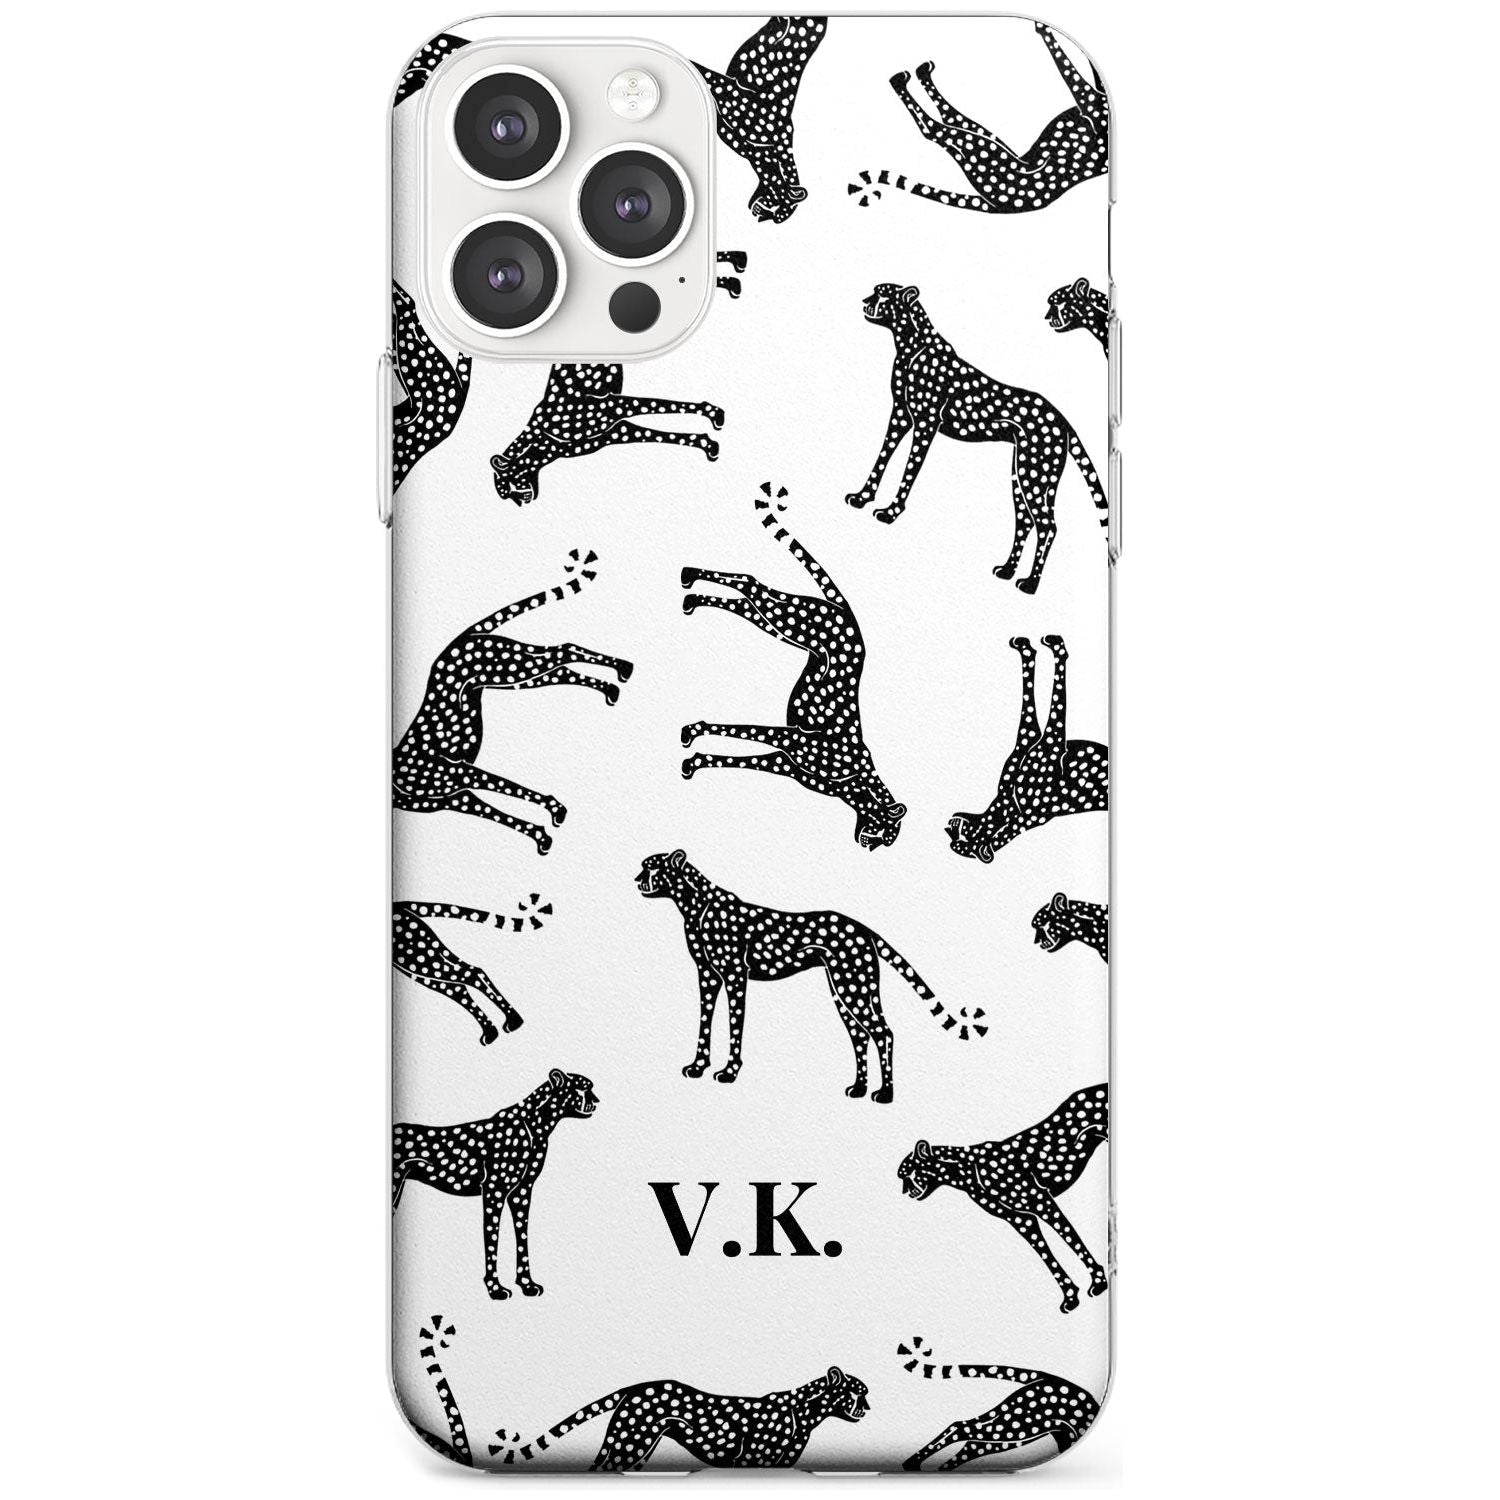 Personalised Cheetah Pattern: Black & White Black Impact Phone Case for iPhone 11 Pro Max